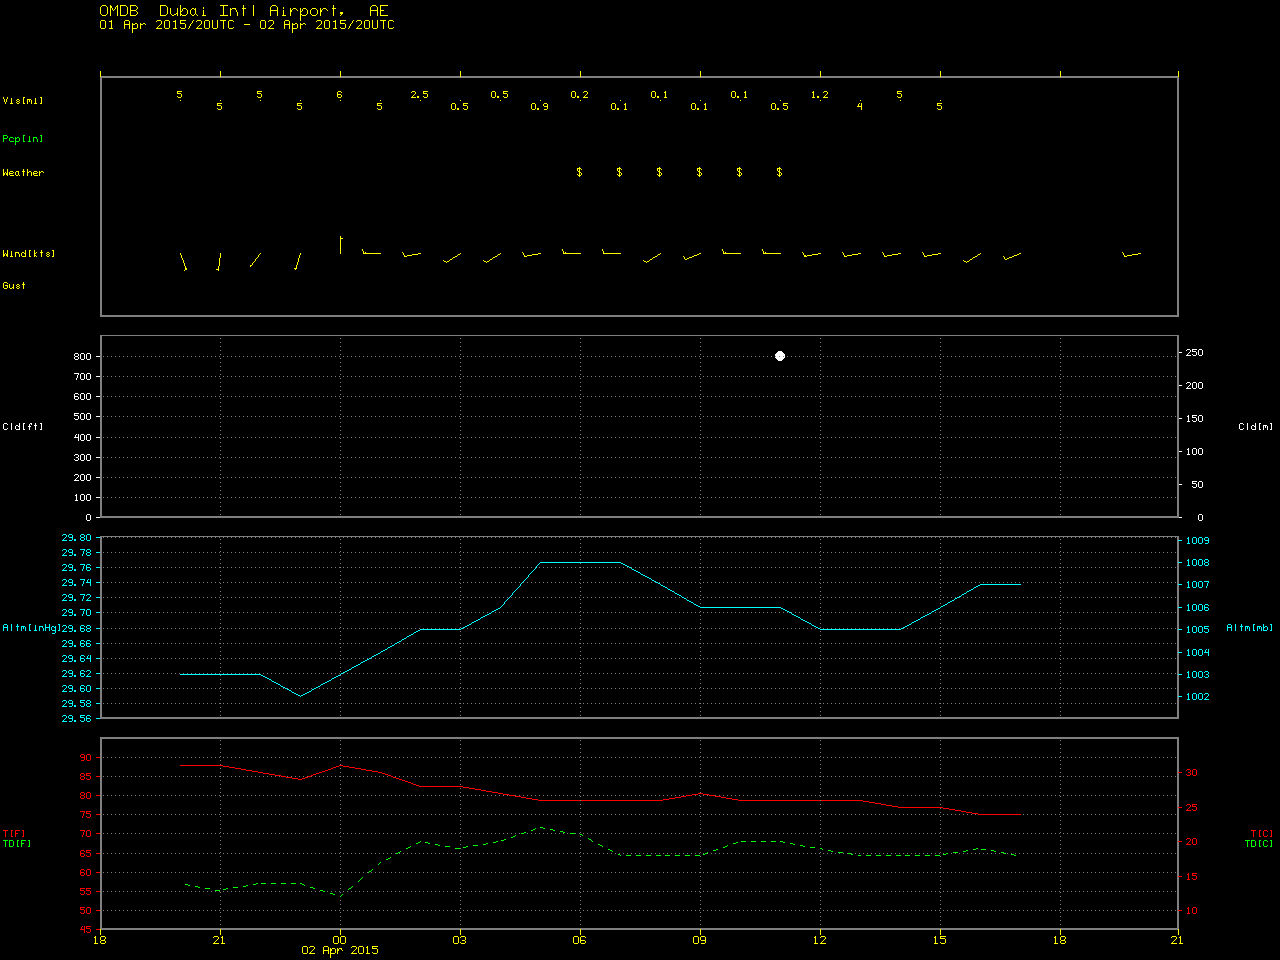 Time series of weather conditions at Dubai International Airport